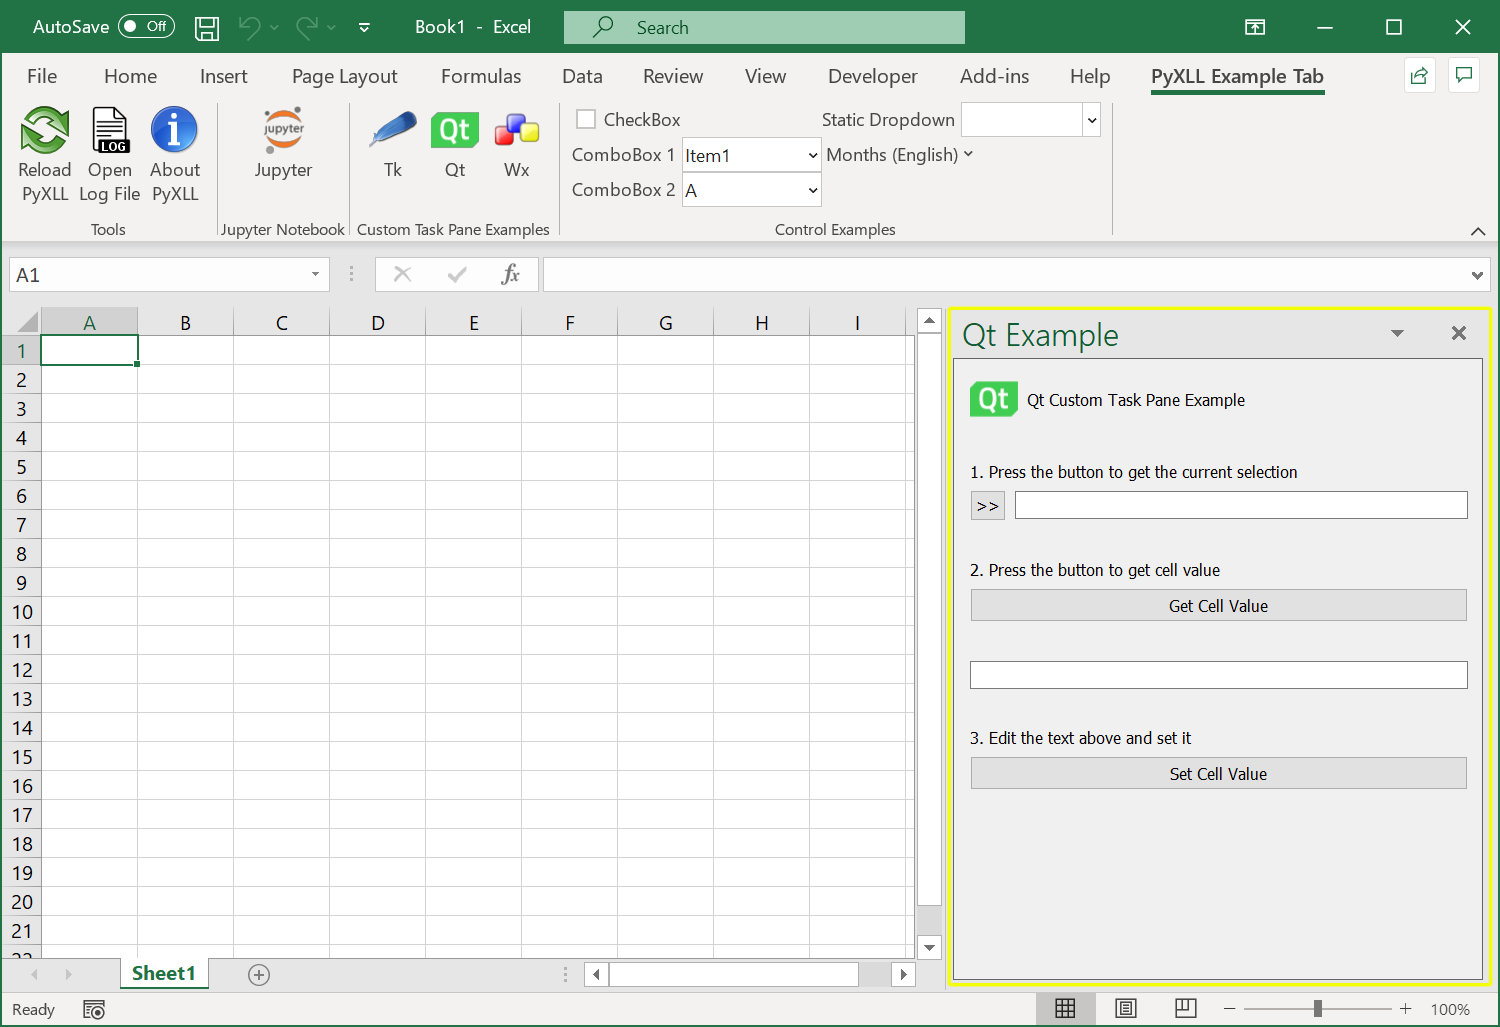 A Python user interface in Excel